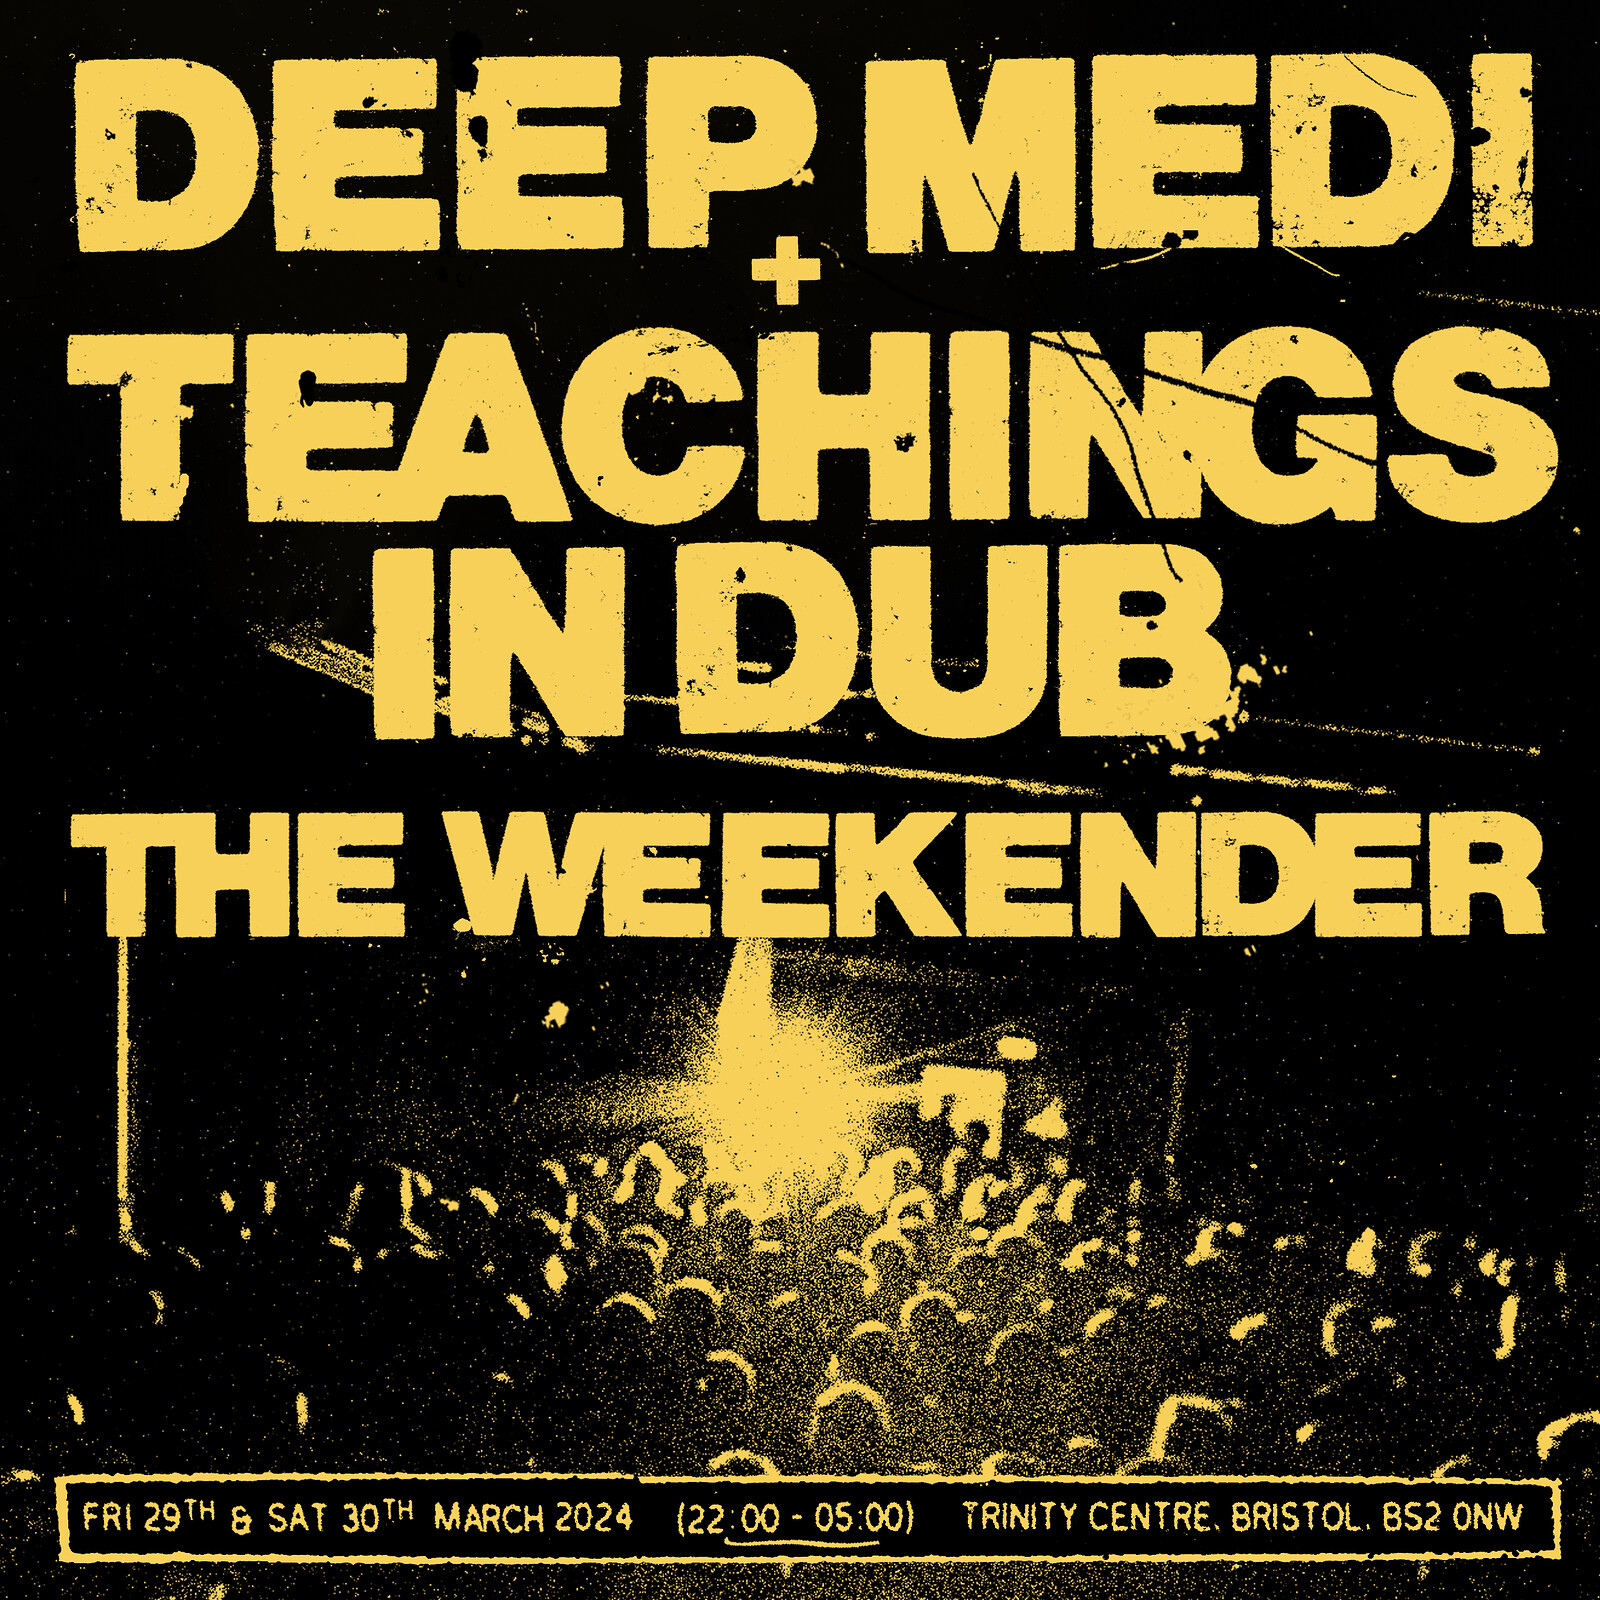 The Weekender : Saturday x Teachings in Dub at The Trinity Centre